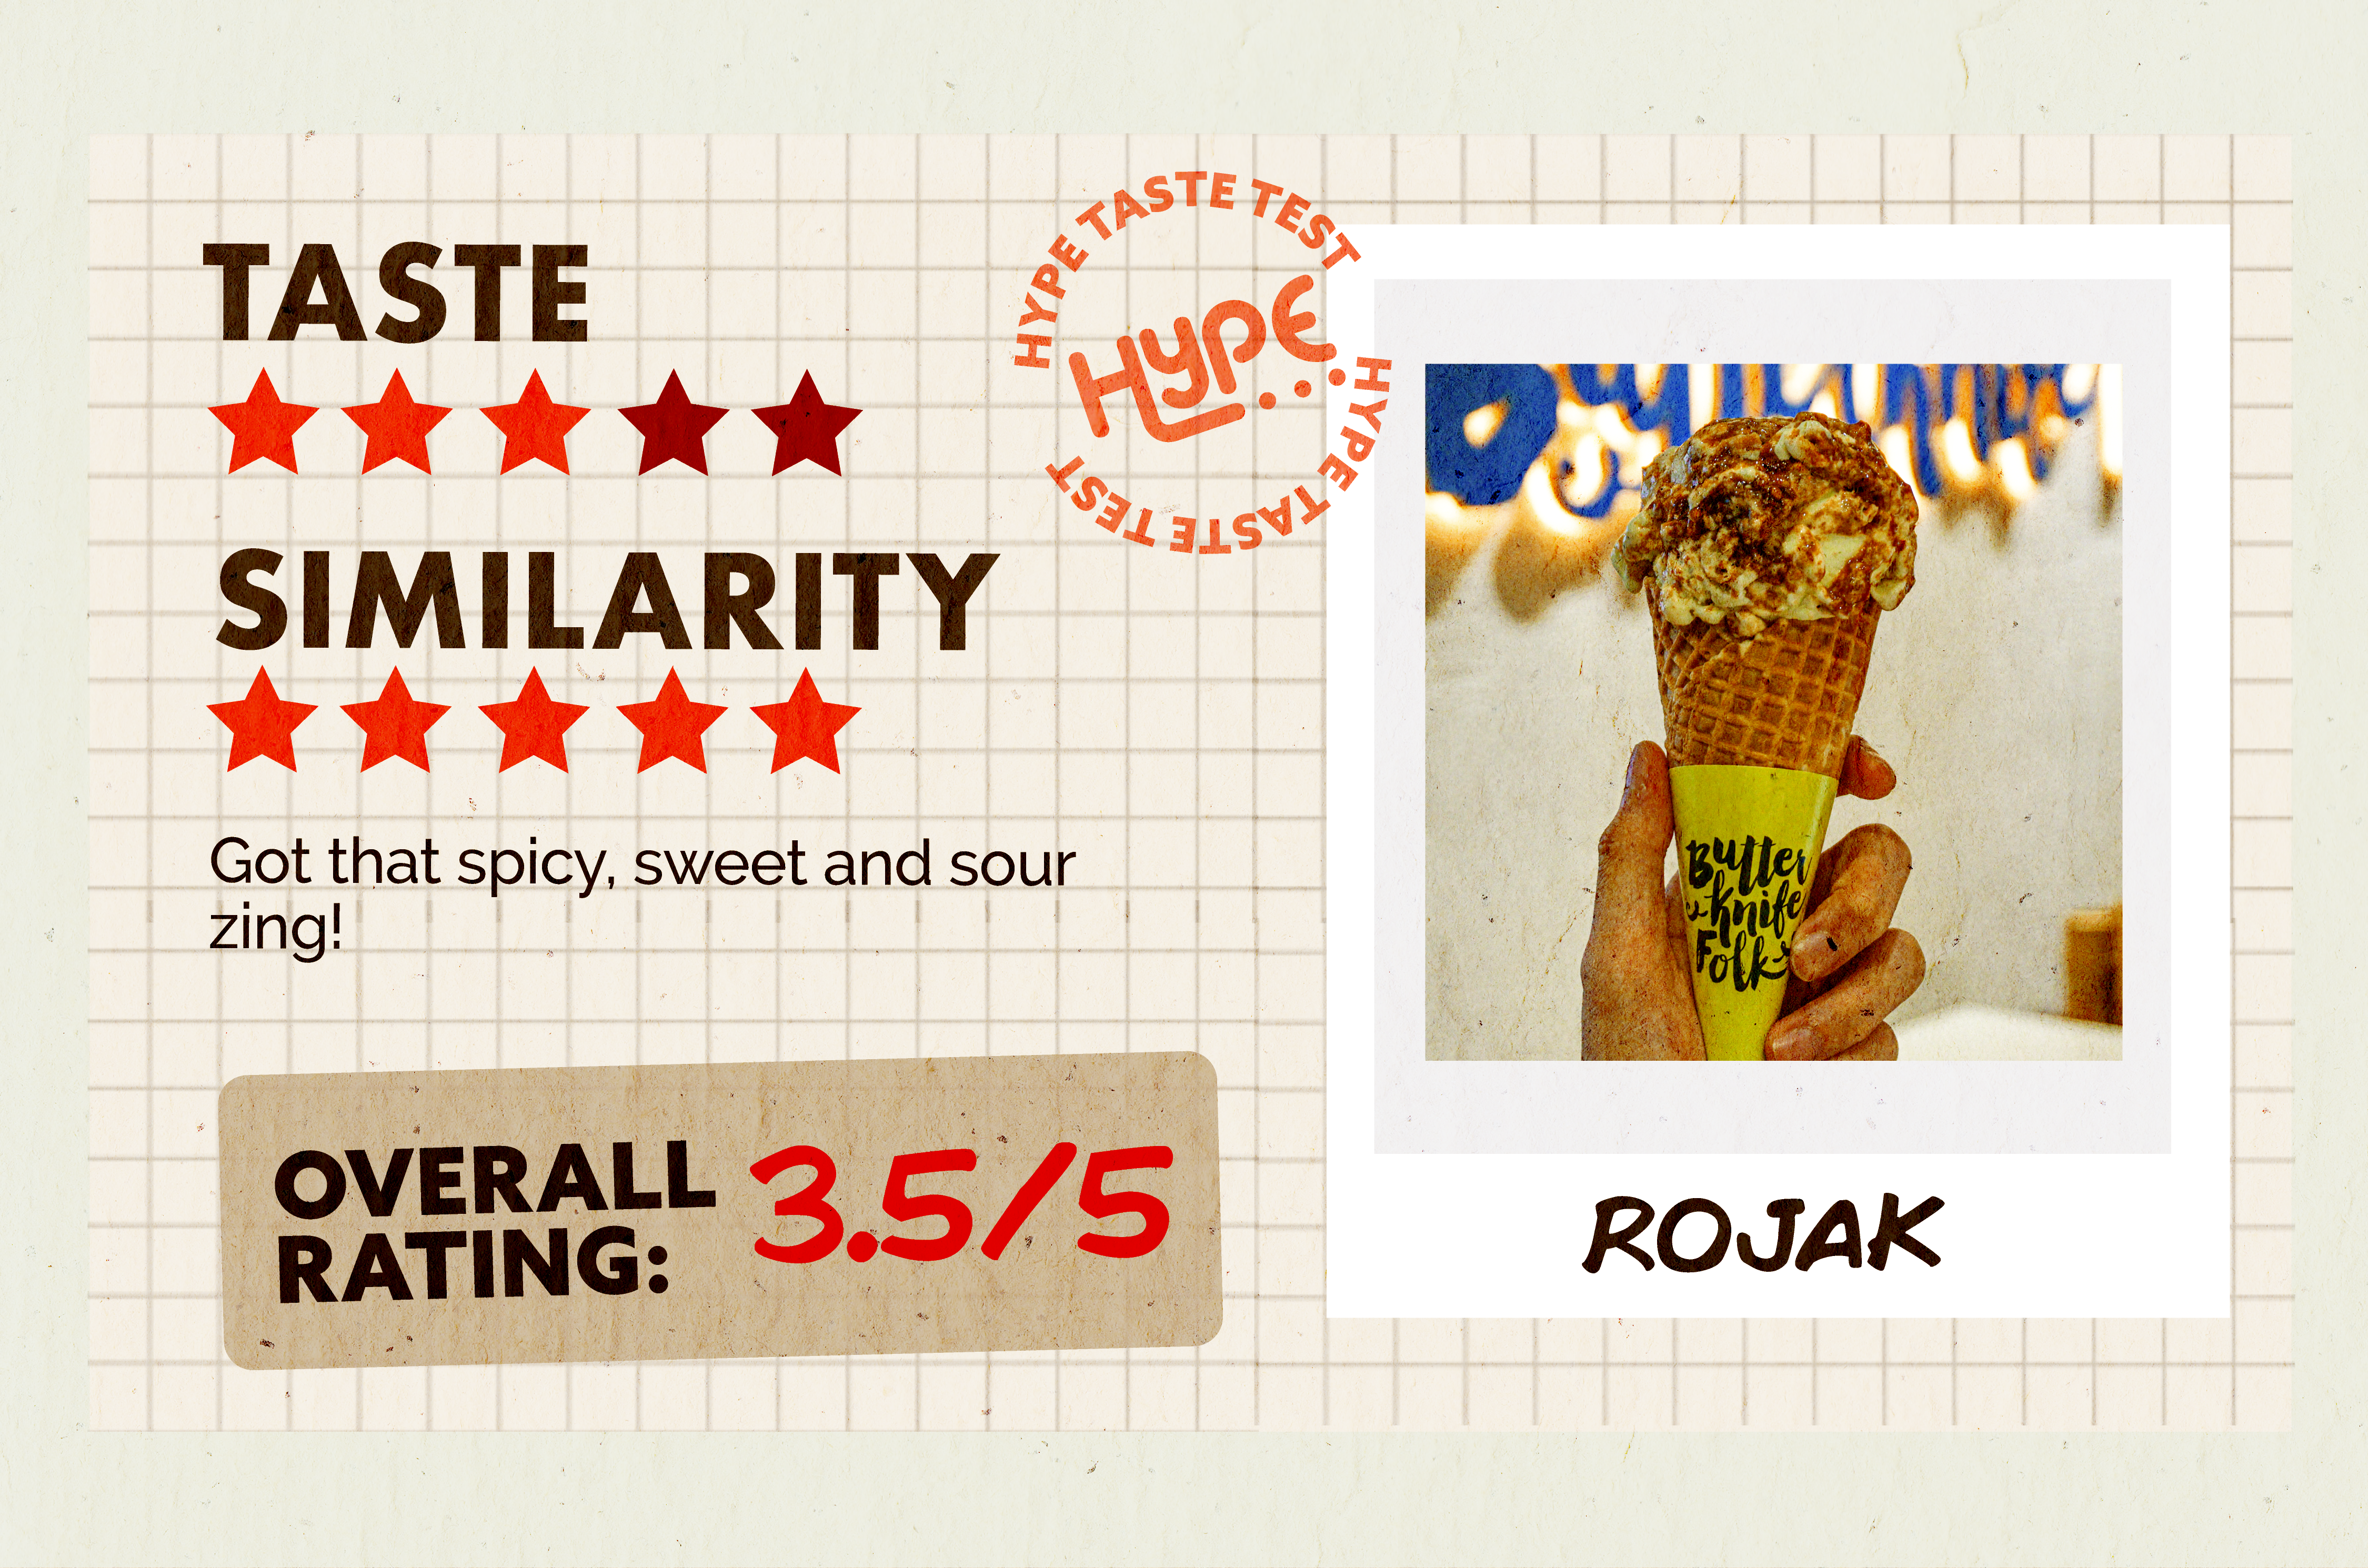 HYPE's rating for Rojak, 3.5/5